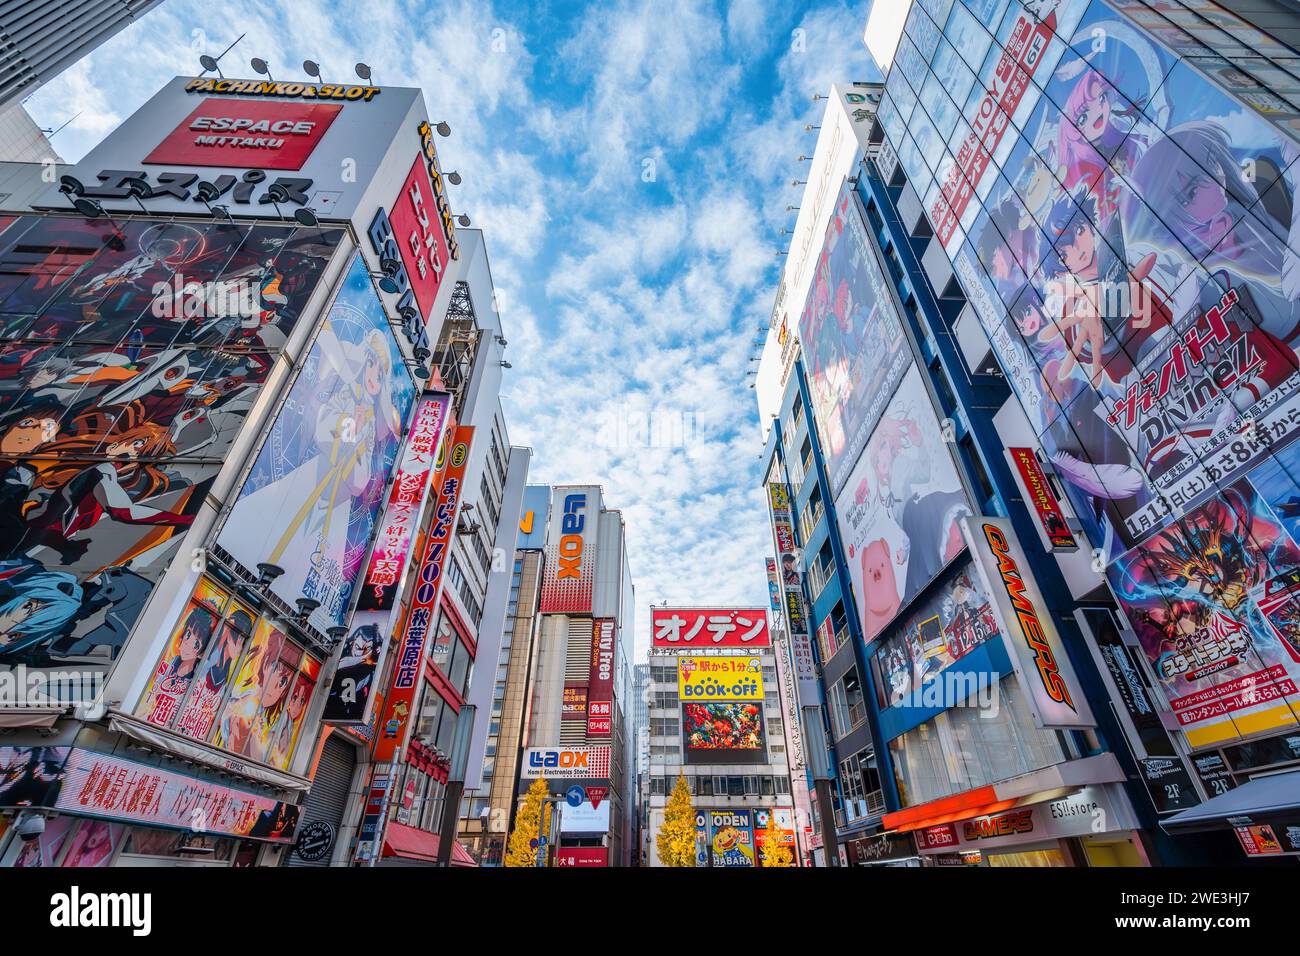 Colorful signs and billboards in Akihabara, Tokyo, Japan. Akihabara is a shopping district famous for its anime, manga, video game and computer shops. Stock Photo